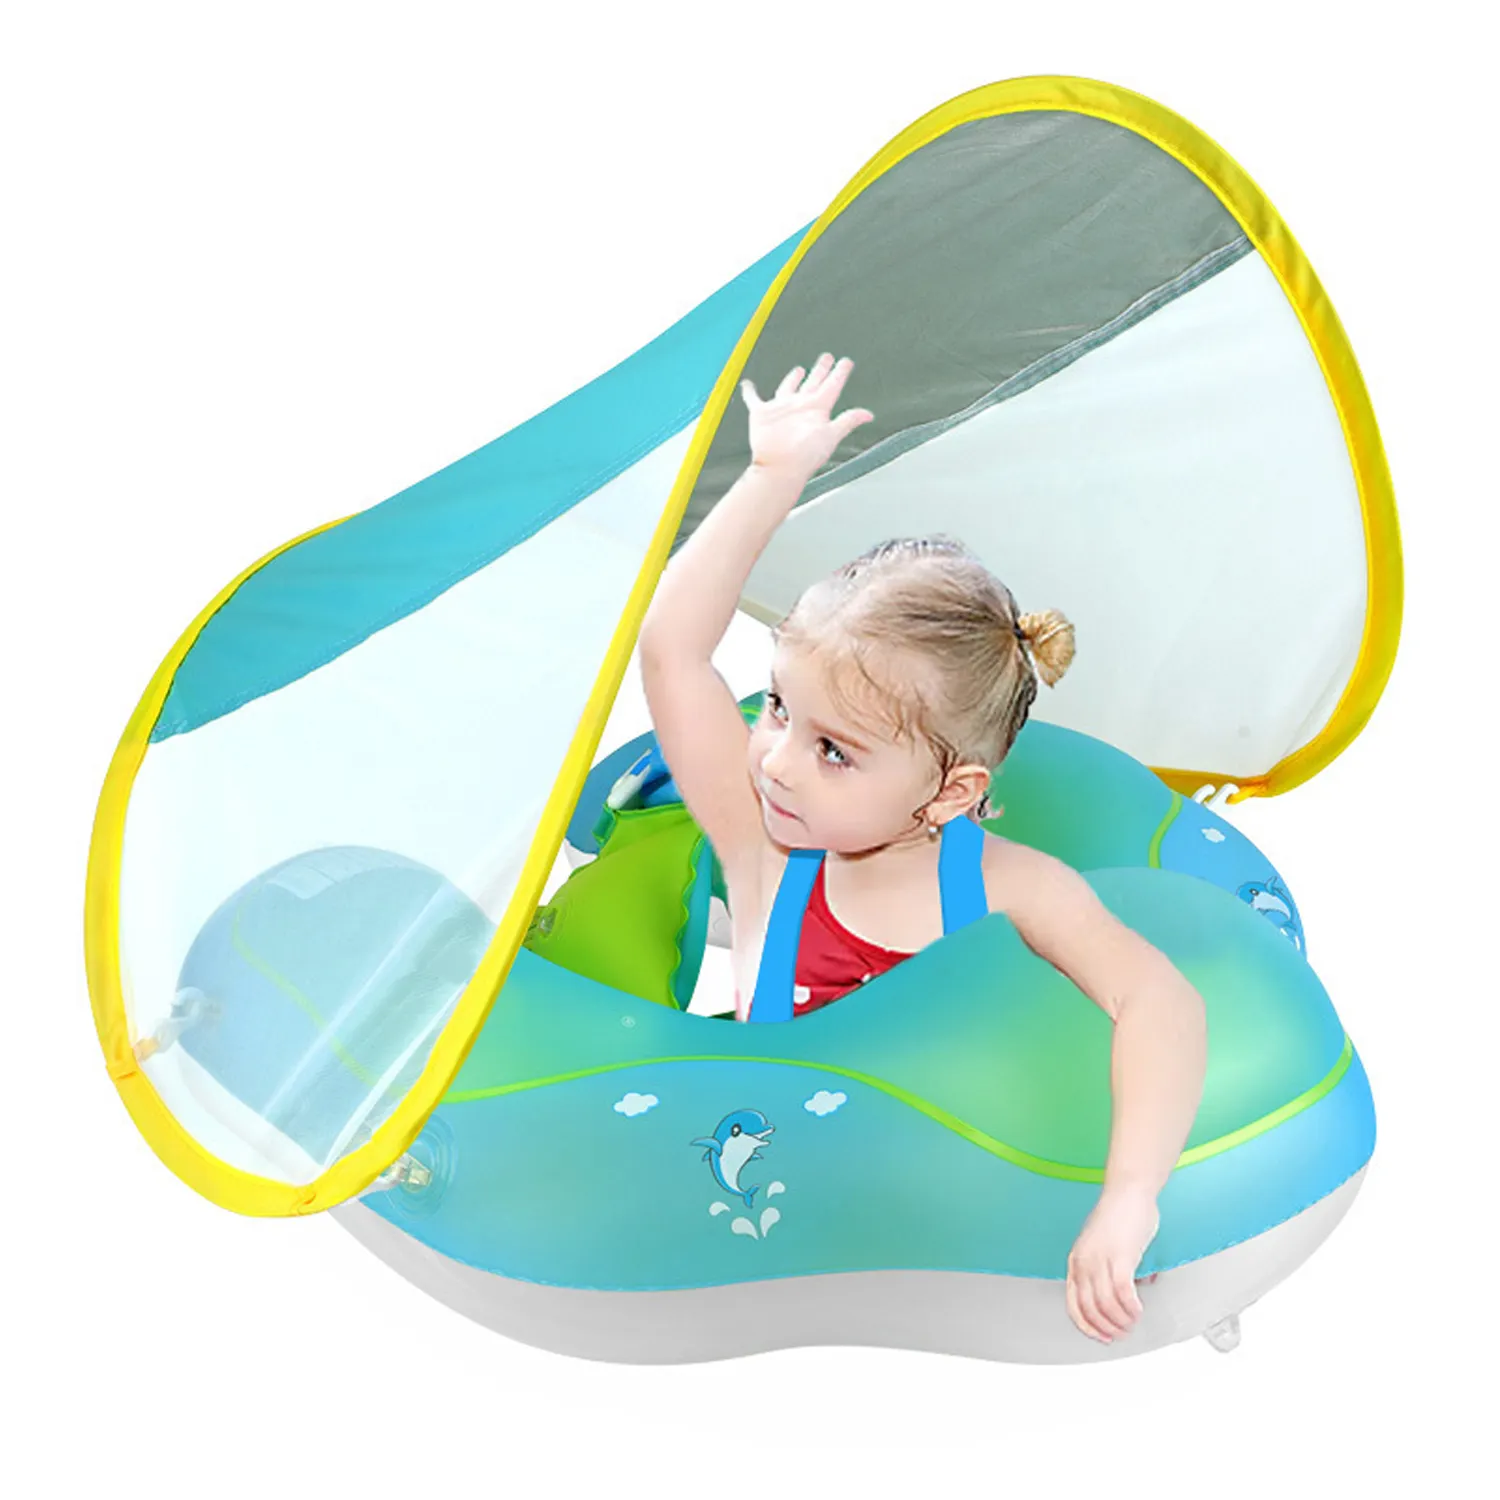 Custom inflatable water swim pool floats ring blue swimming pool baby portable floating rings toy floats with safety seat